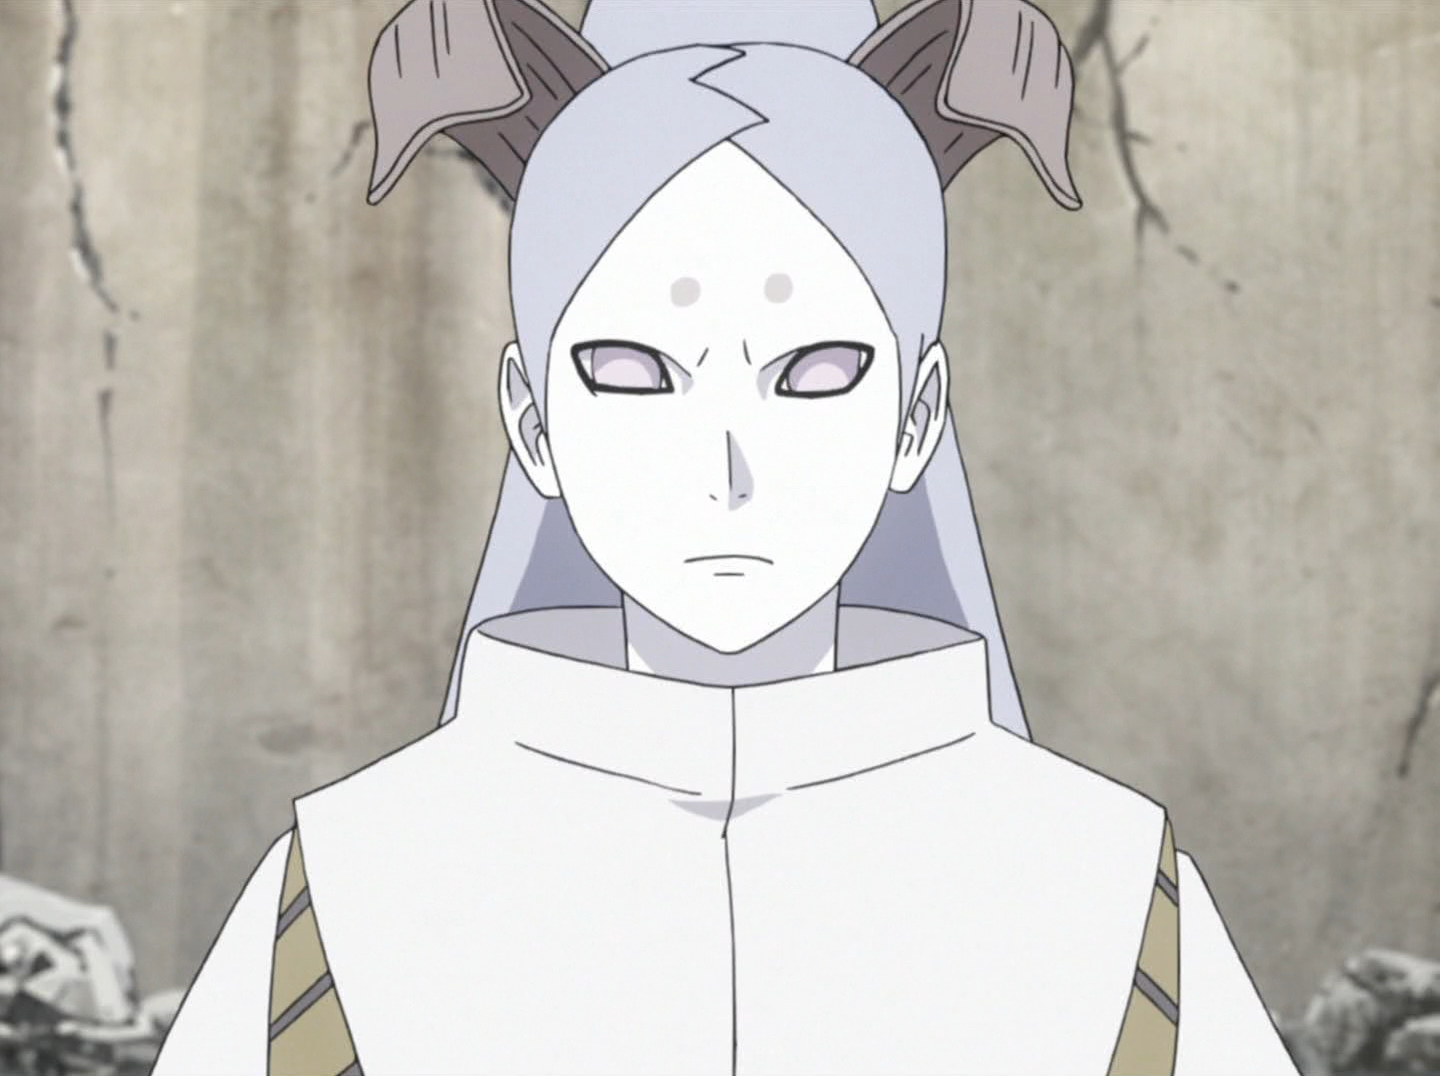 Who is a tougher opponent for Boruto between Momoshiki and Code?